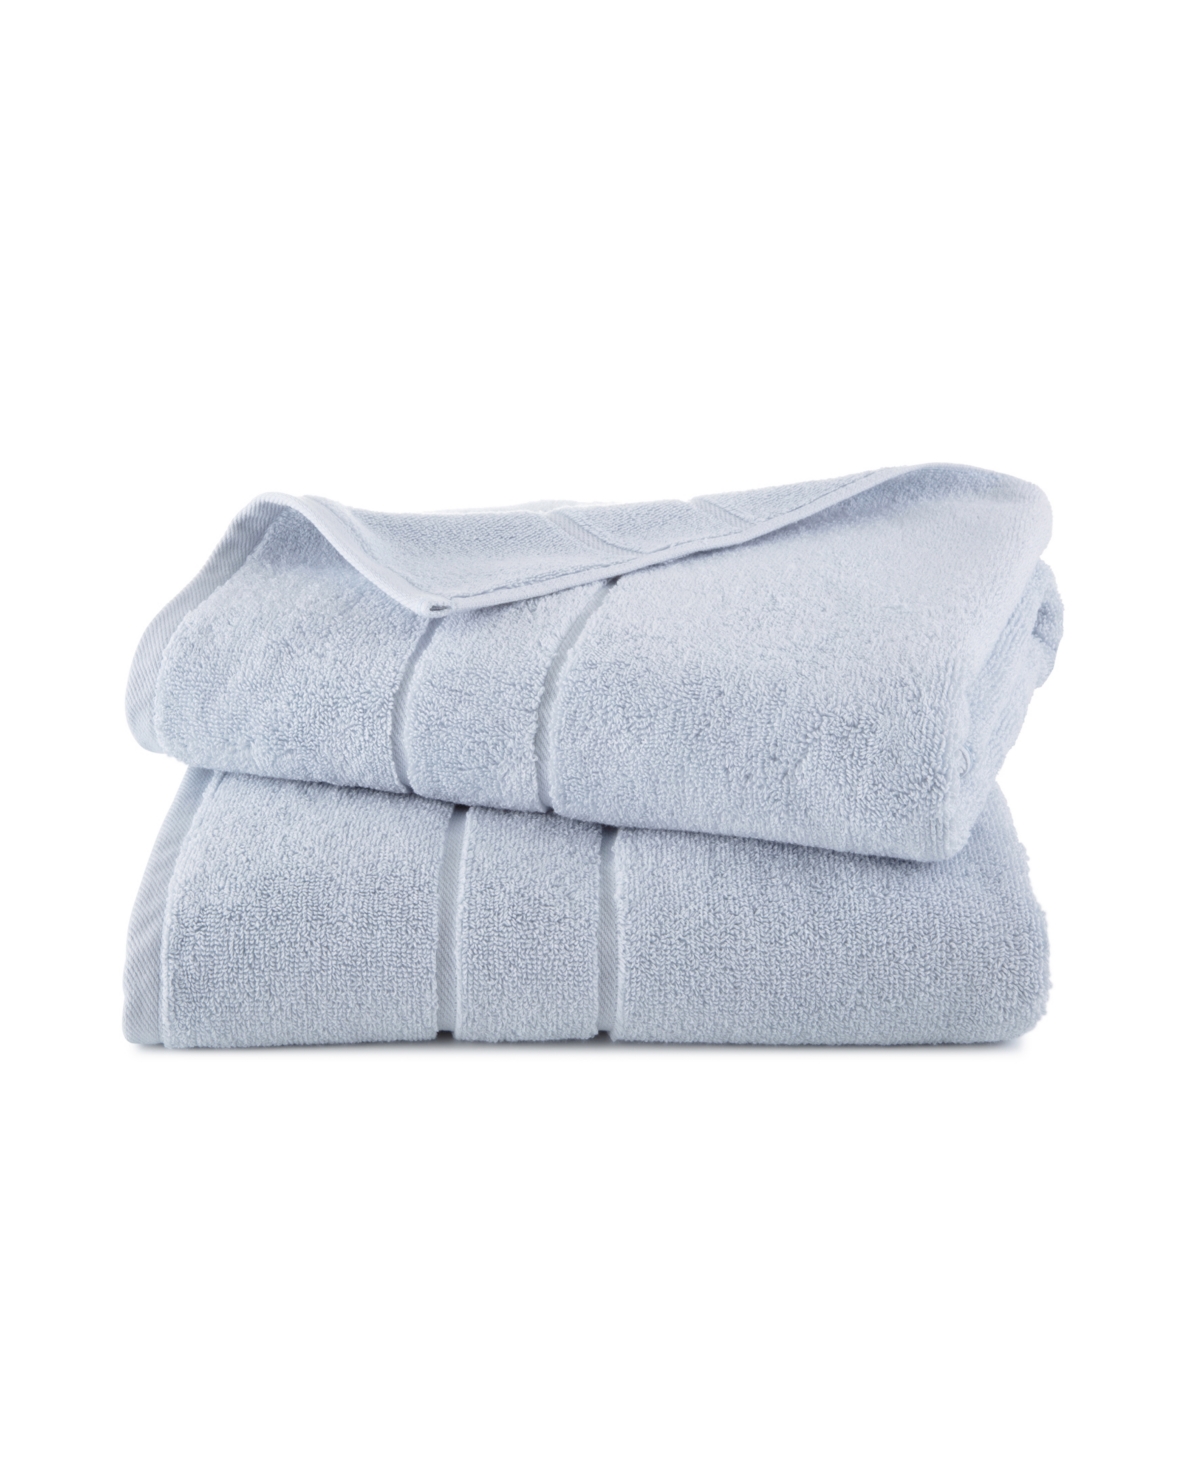 Clean Design Home X Martex Low Lint 2 Pack Supima Cotton Hand Towels In Blue